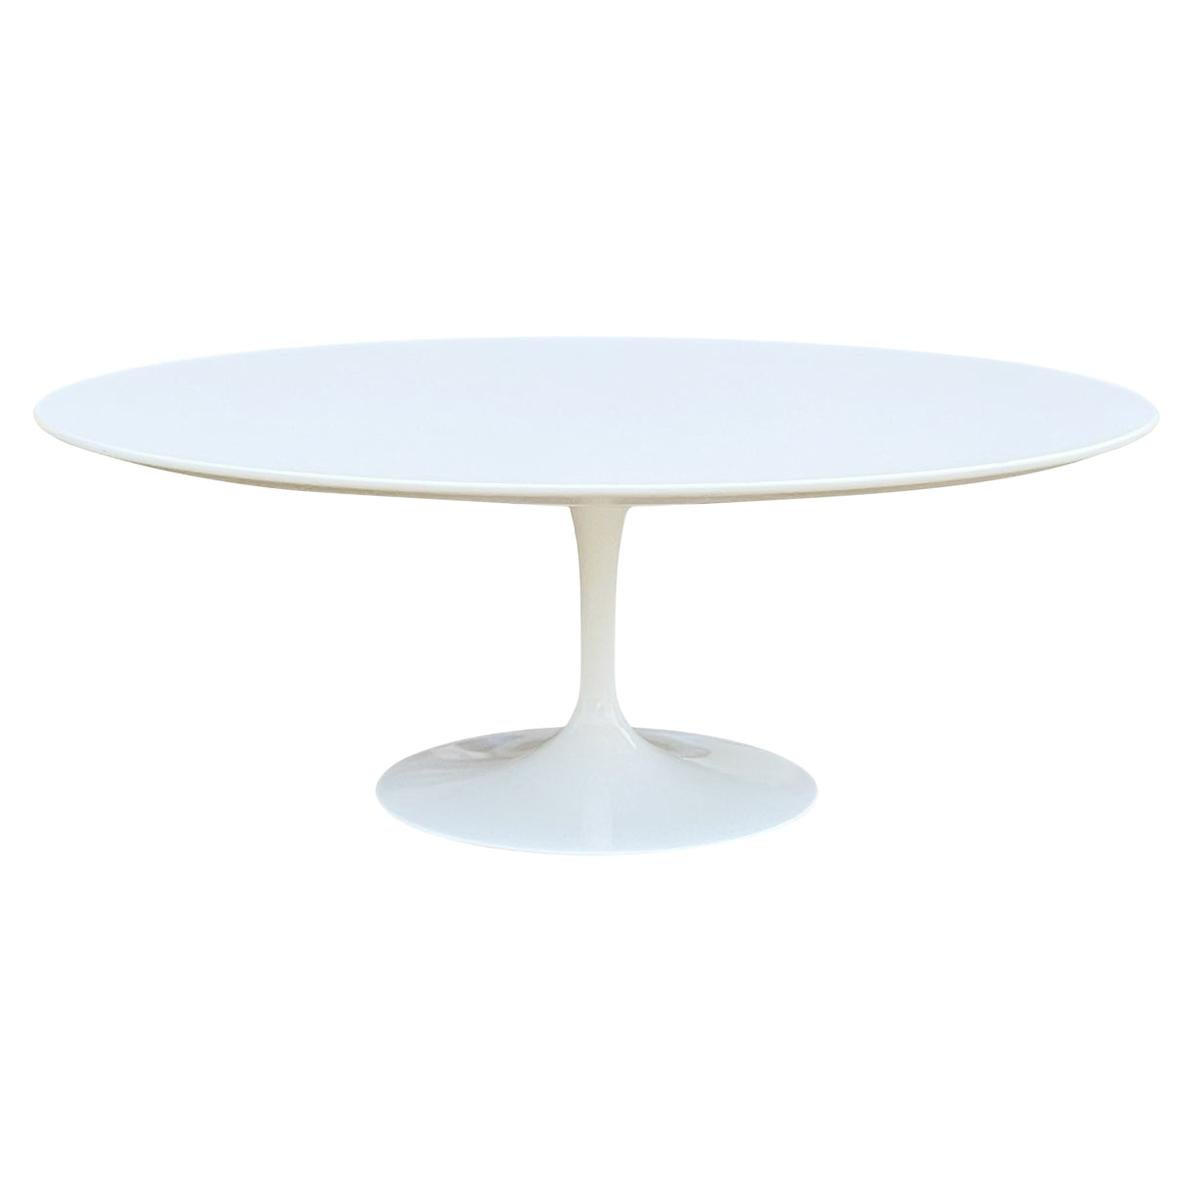 Mid-Century Modern White Tulip Oval Cocktail Table by Eero Saarinen for Knoll For Sale